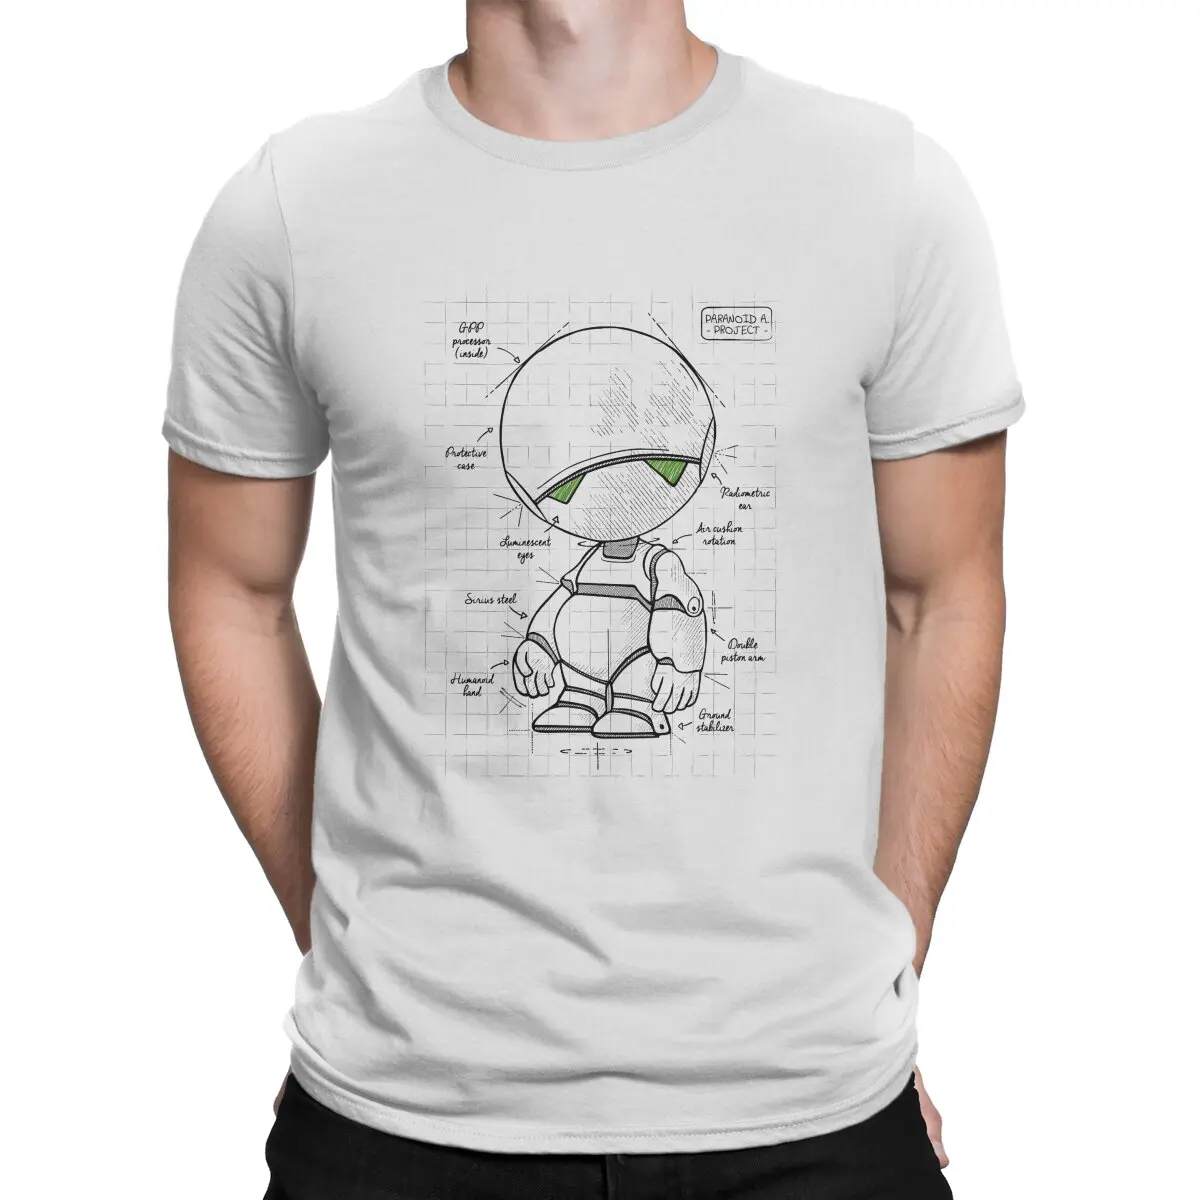 

Droid project T-Shirt Men The Hitchhikers Guide To The Galaxy Film Awesome 100% Cotton Tees Round Neck T Shirt Graphic Clothes